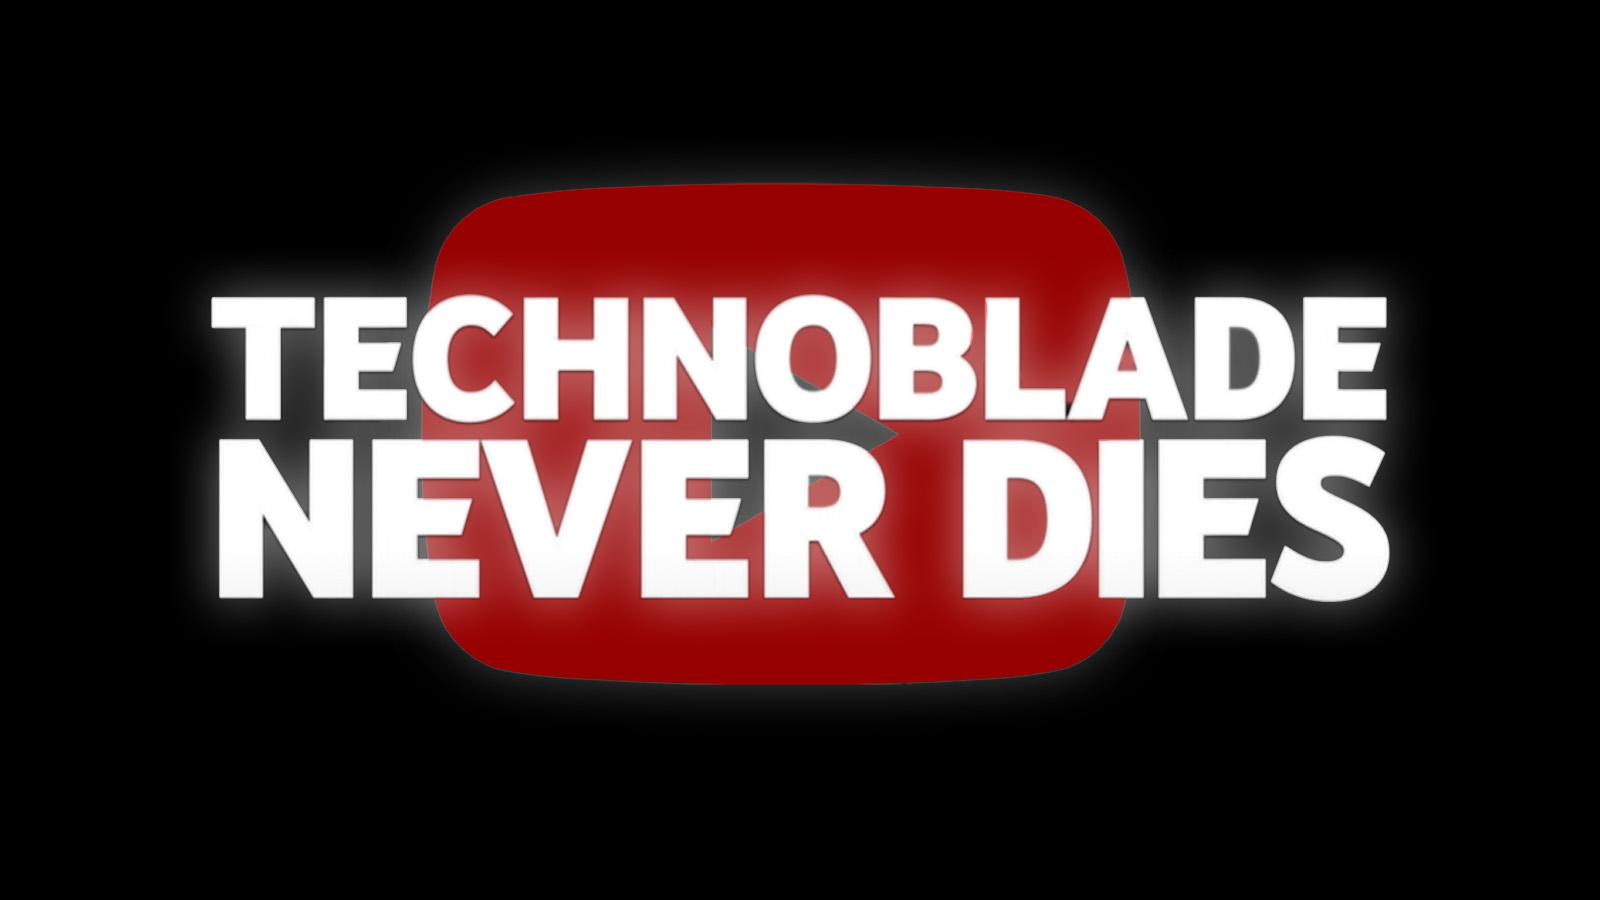 Topic · Technoblade never dies ·